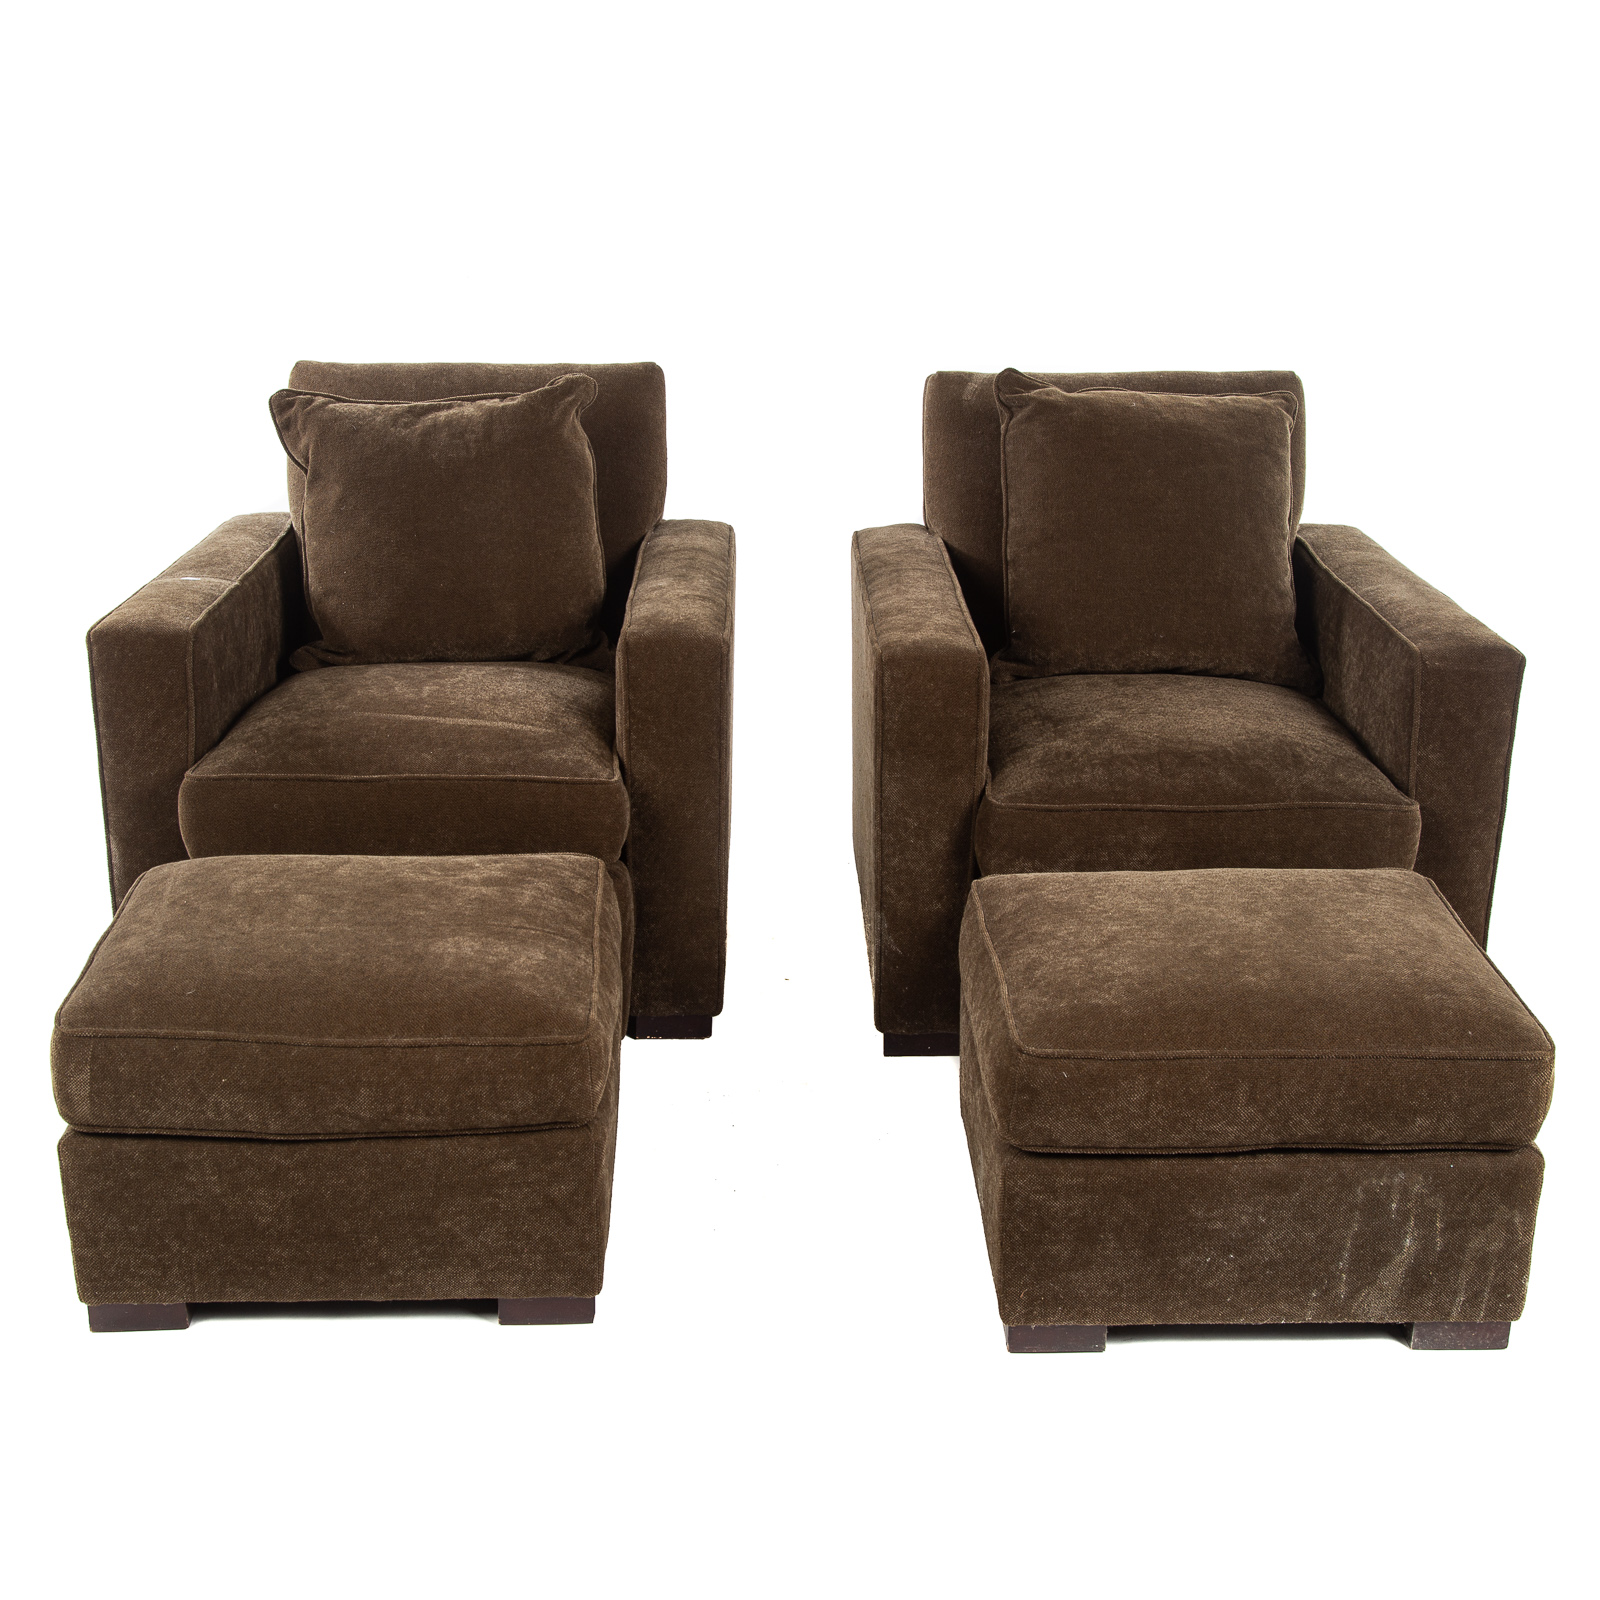 A PAIR HICKORY CHAIR UPHOLSTERED 36a4ae